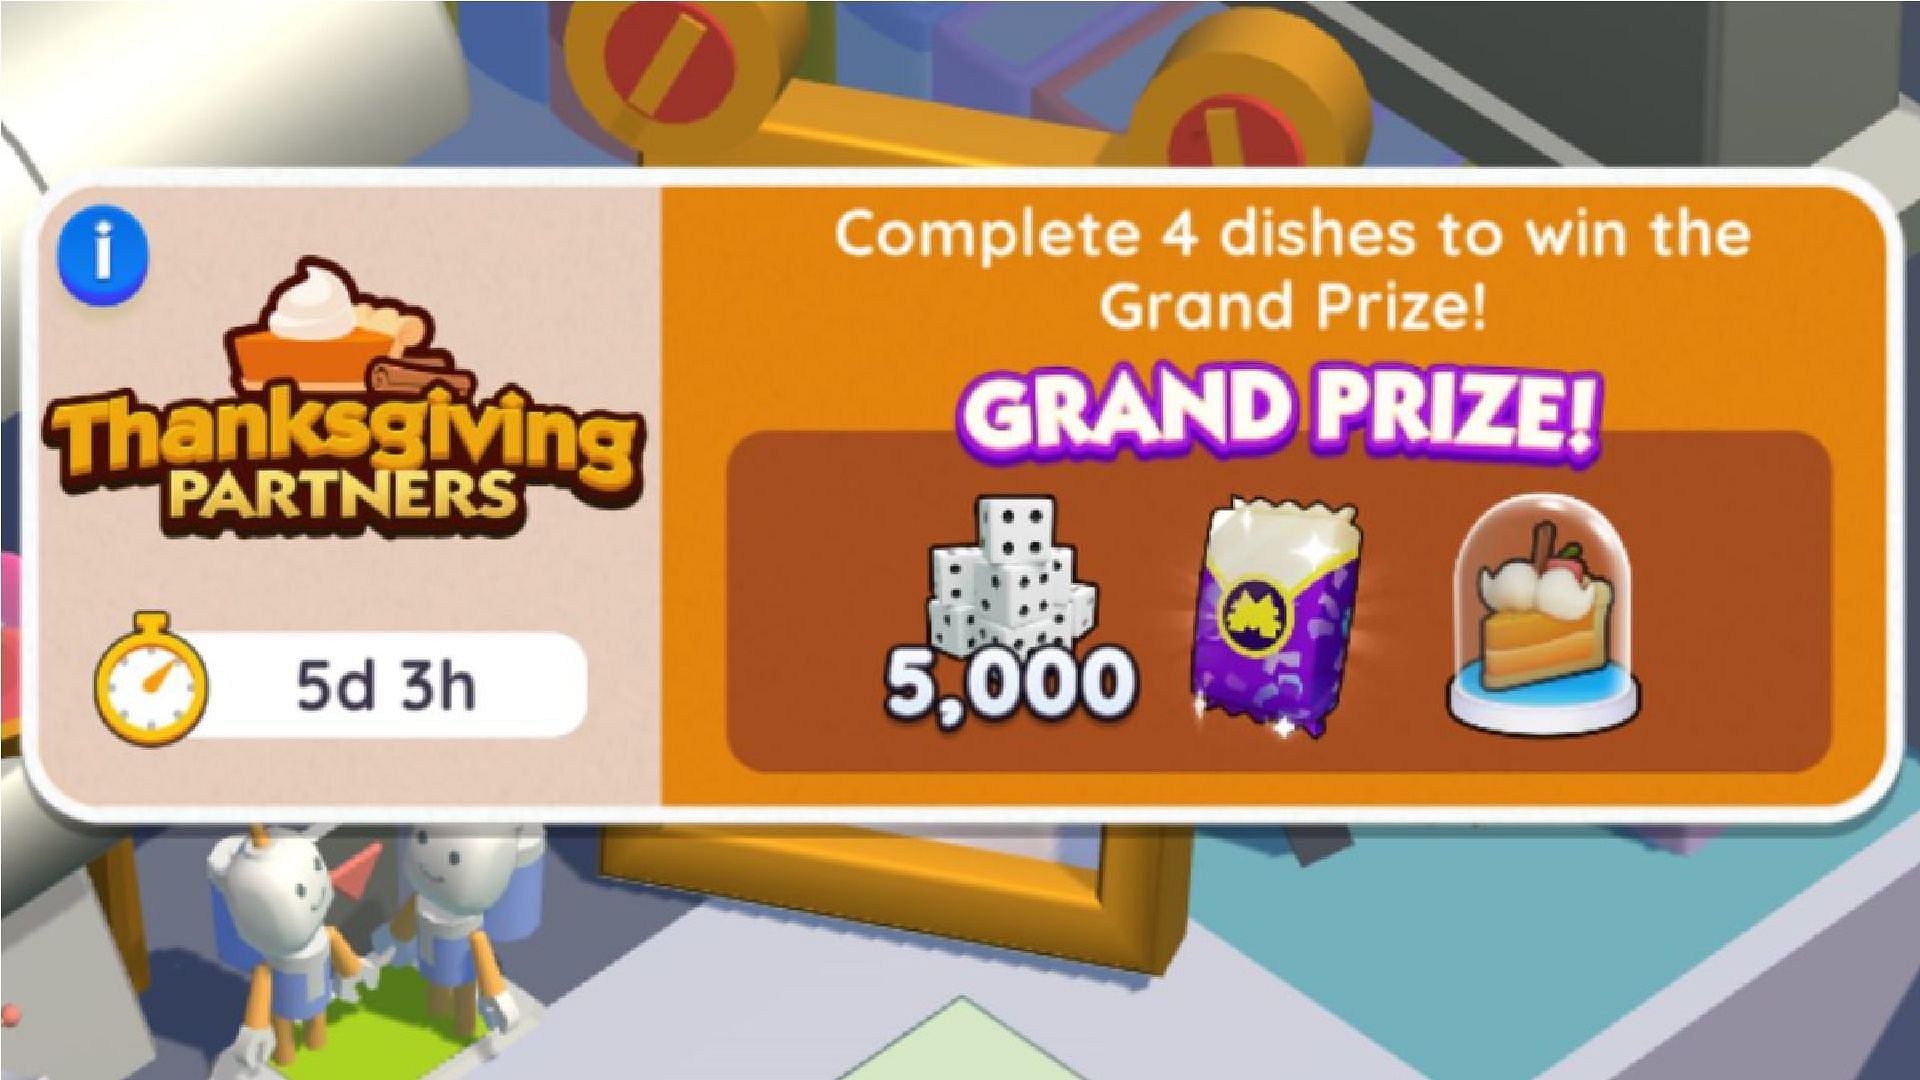 The prizes for Thanksgiving Partners in Monopoly Go event (Image via Scopely)